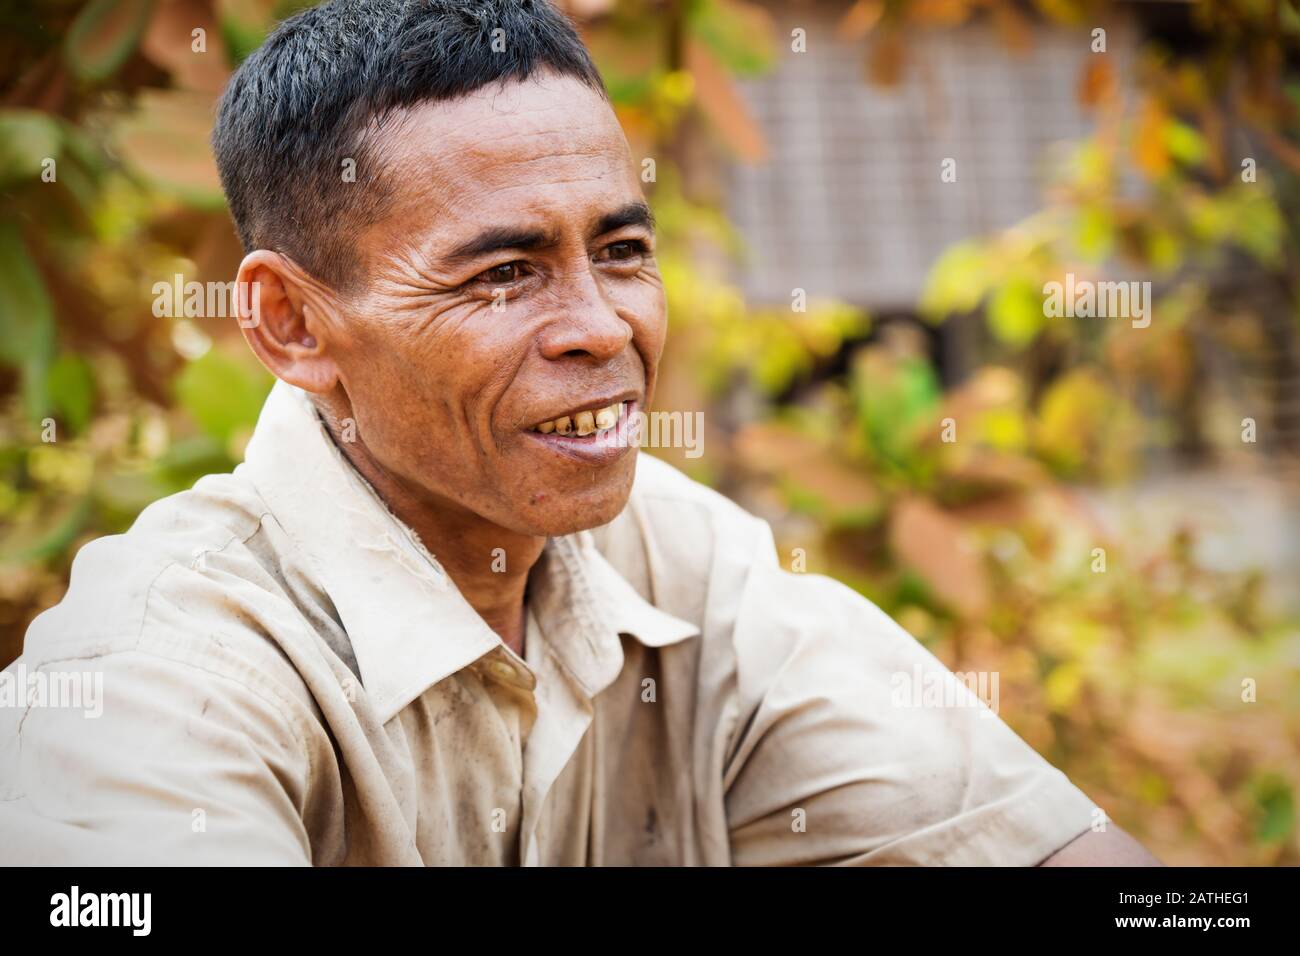 Puok, Siem Reap Province, Cambodia - 4 April 2013: Cambodian local man smiling with orange leaves background Stock Photo